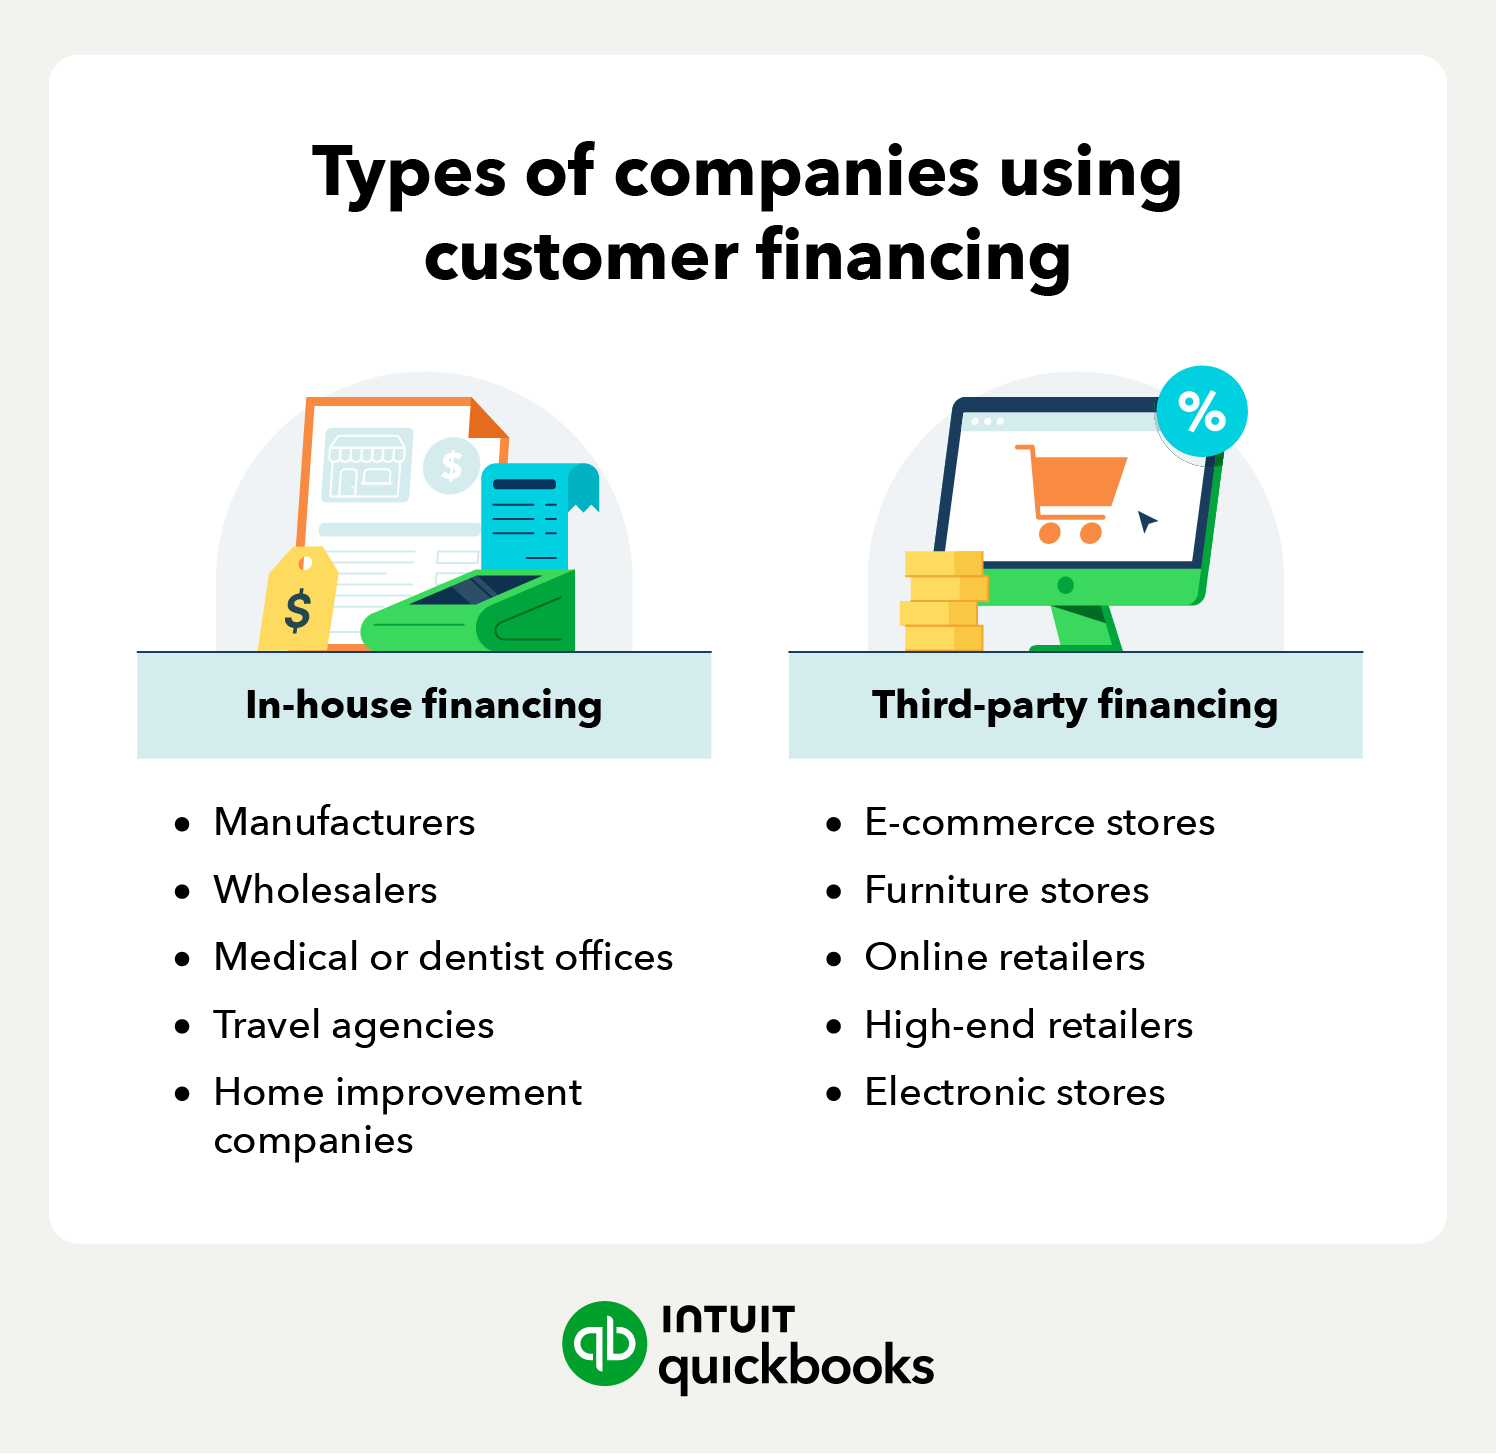 An illustration of the types of companies using customer financing: in-house financing users include manufacturers and wholesalers; third-party financing users include e-commerce stores and online retailers.